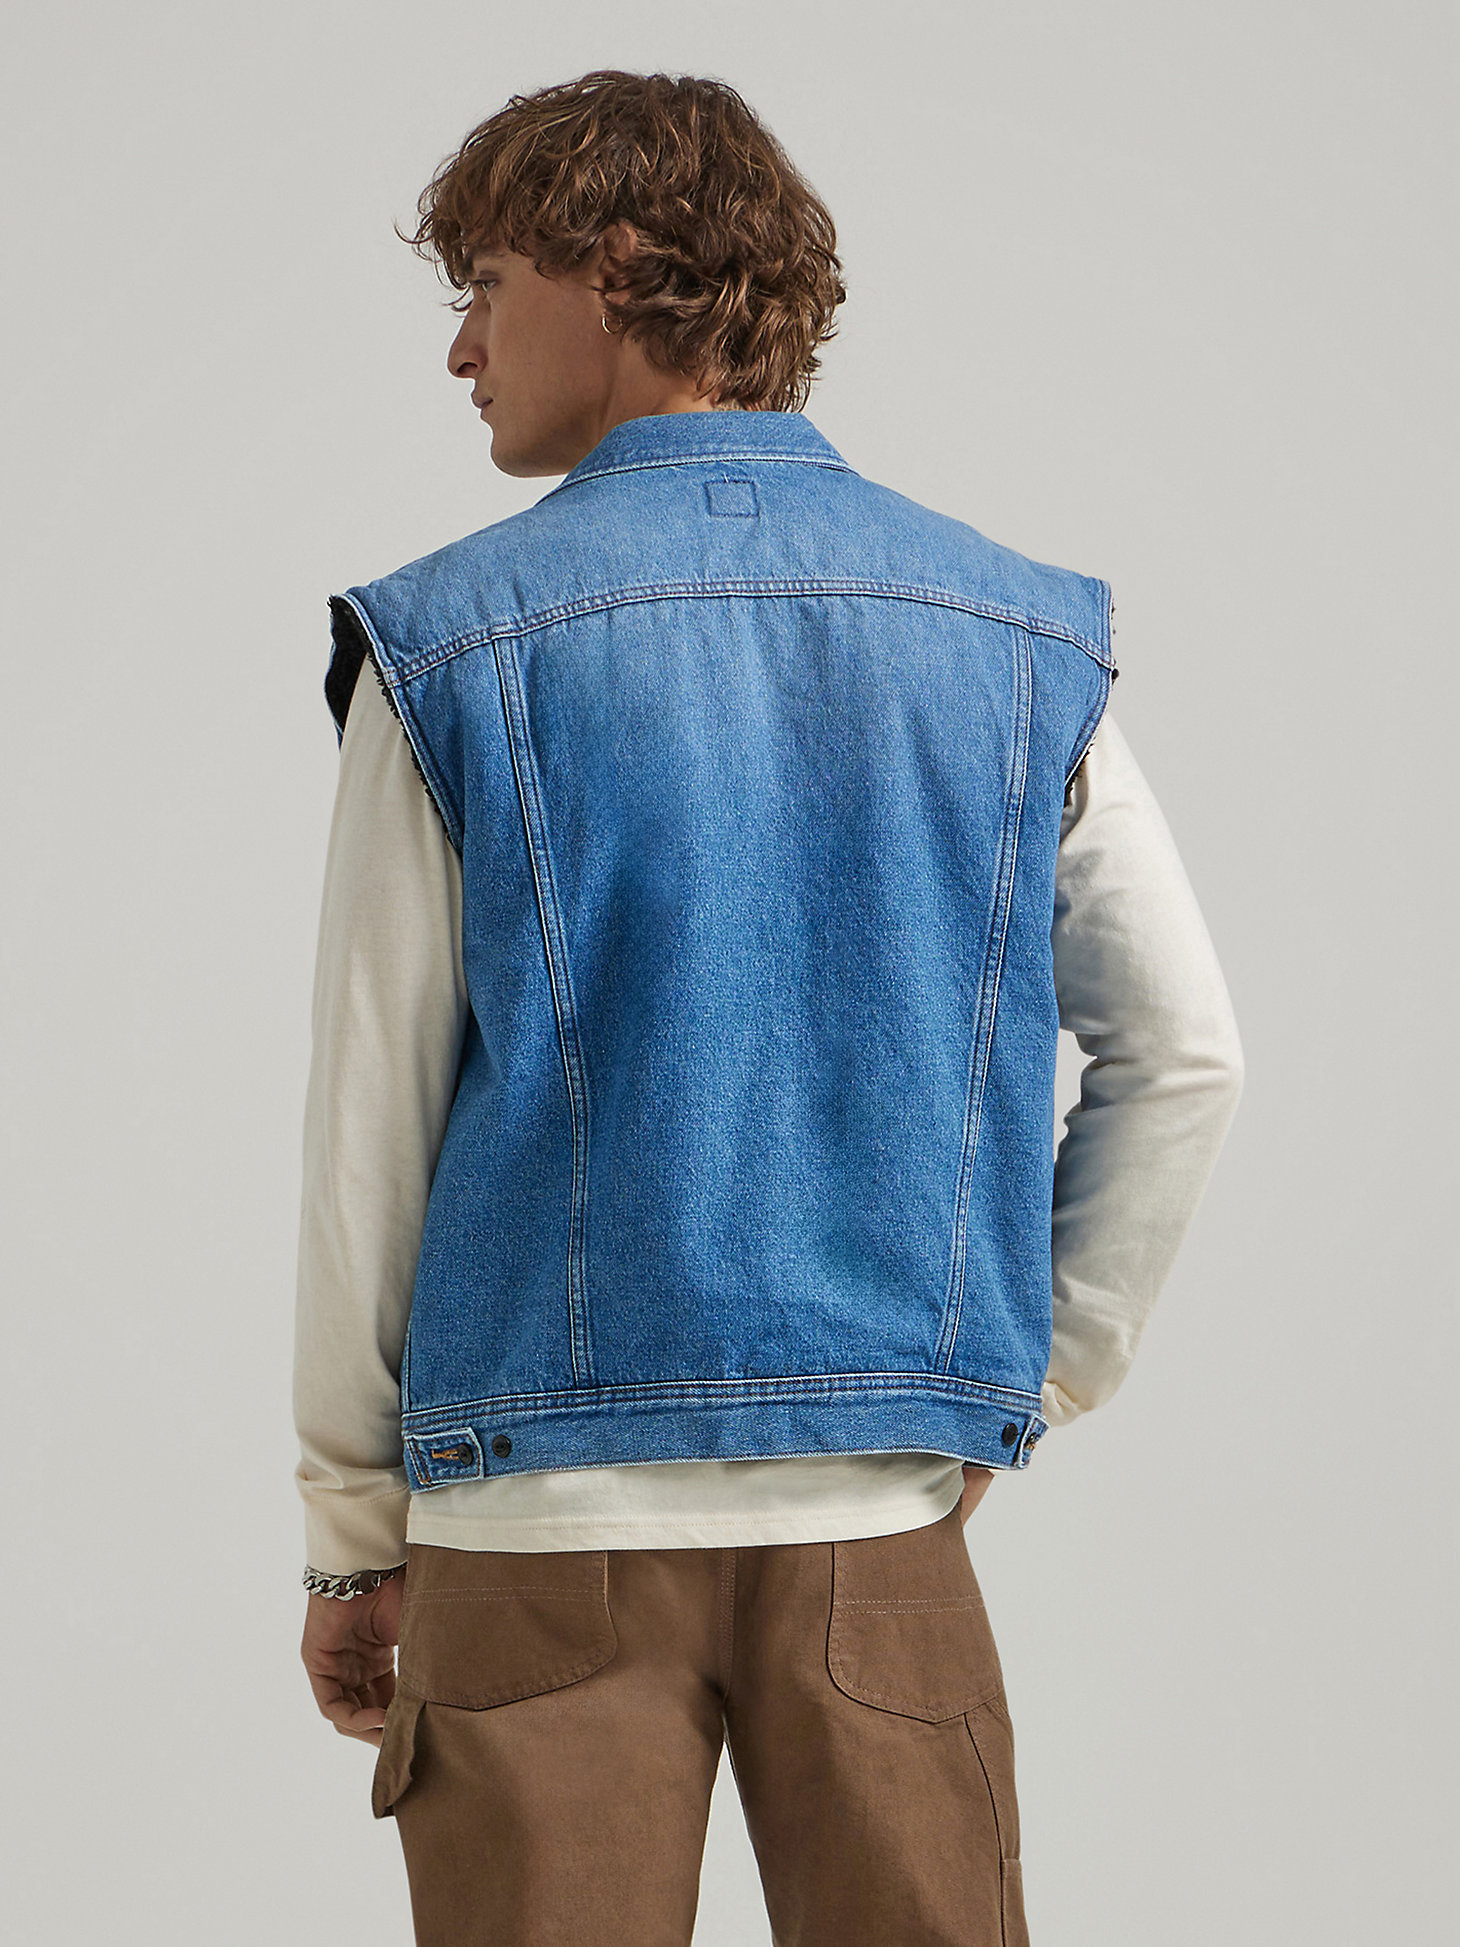 Men's Relaxed Sherpa Lined Rider™ Vest in Setlist Blue alternative view 1